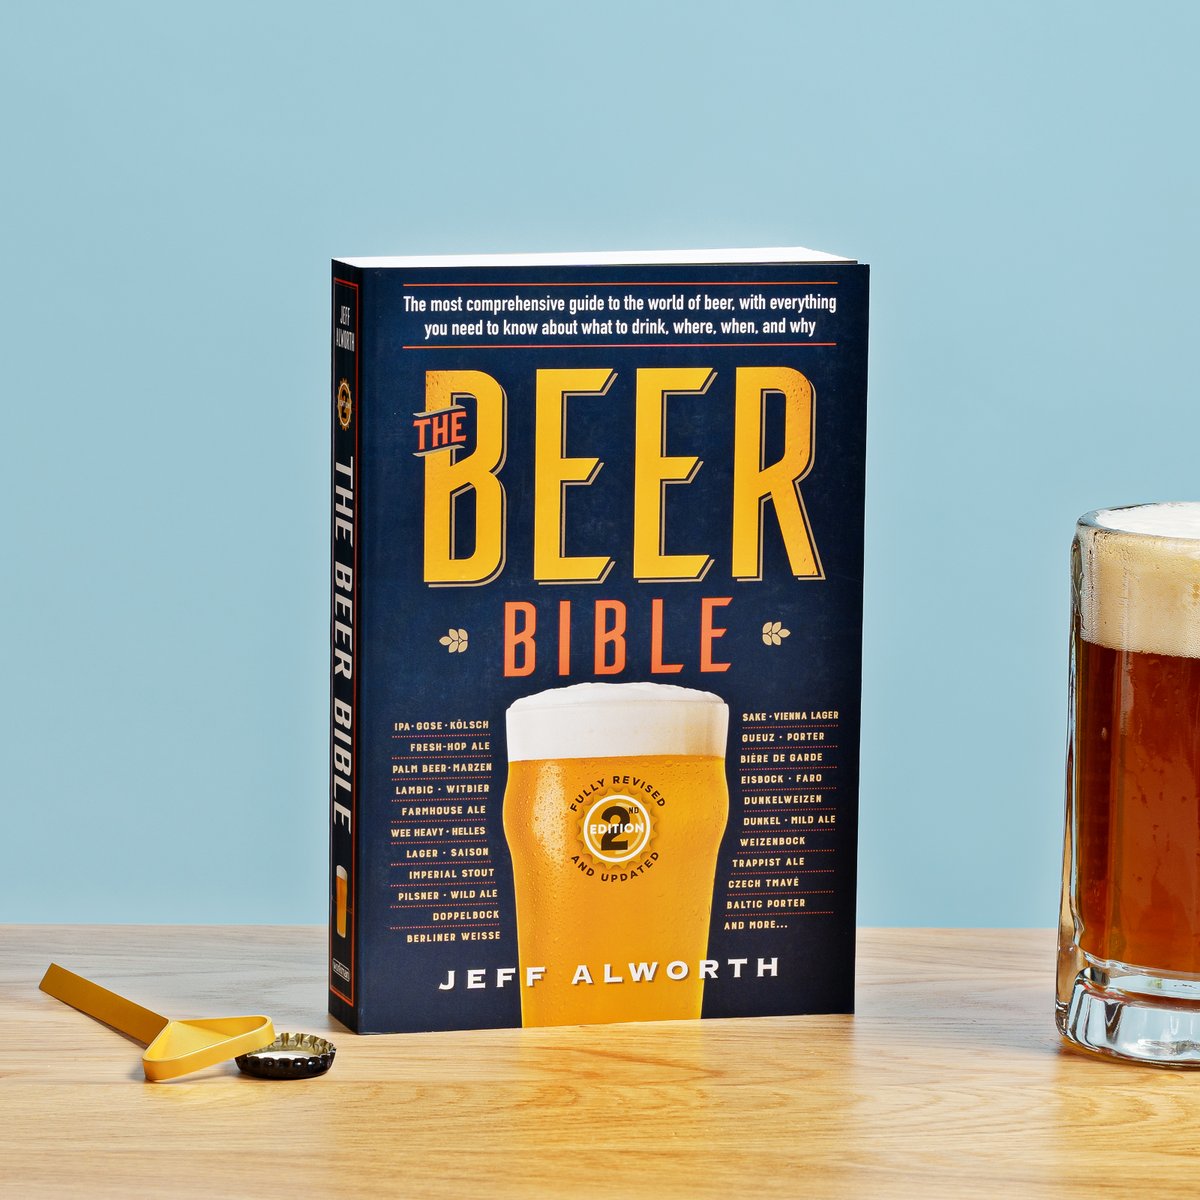 Whether you’re a certified #beer drinker or a casual sipper, THE BEER BIBLE by Jeff Alworth (@Beervana) is the comprehensive guide with everything you need to know about what to drink, where, when and why Cheers to #NationalBeerDay and being the best educated drinker at the bar!